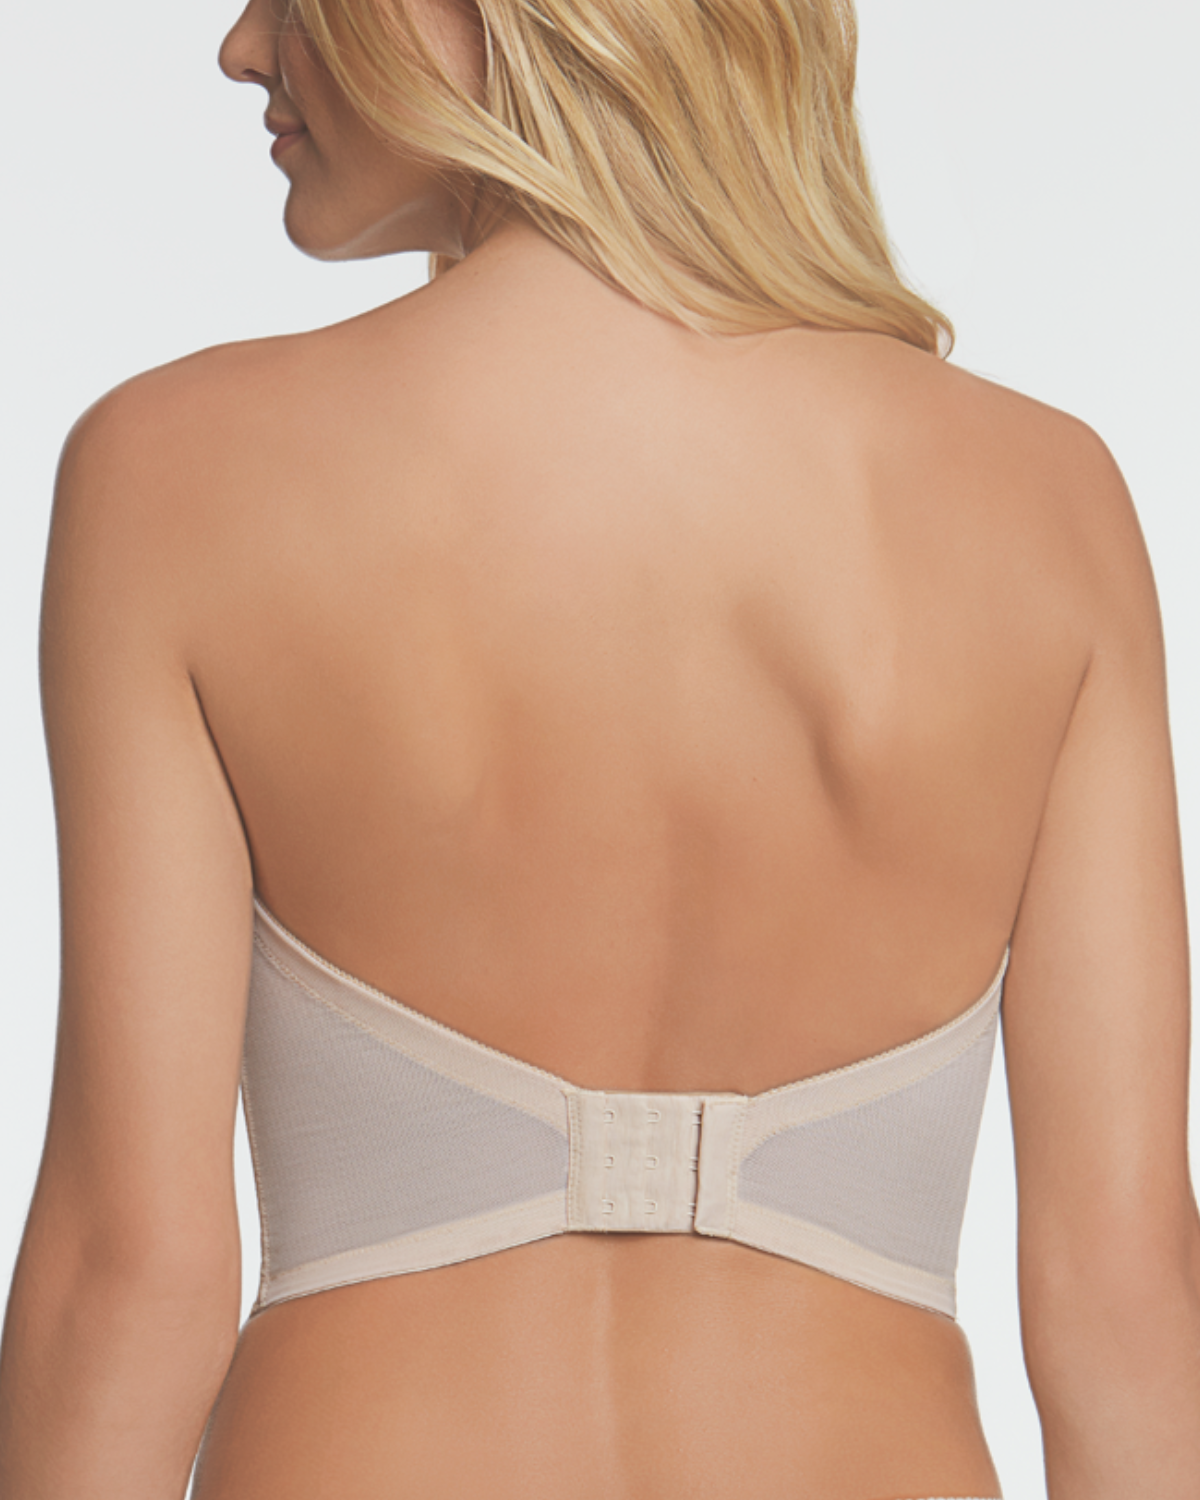 Dominique Tayler Backless Strapless Lace Longline Bra - 6744